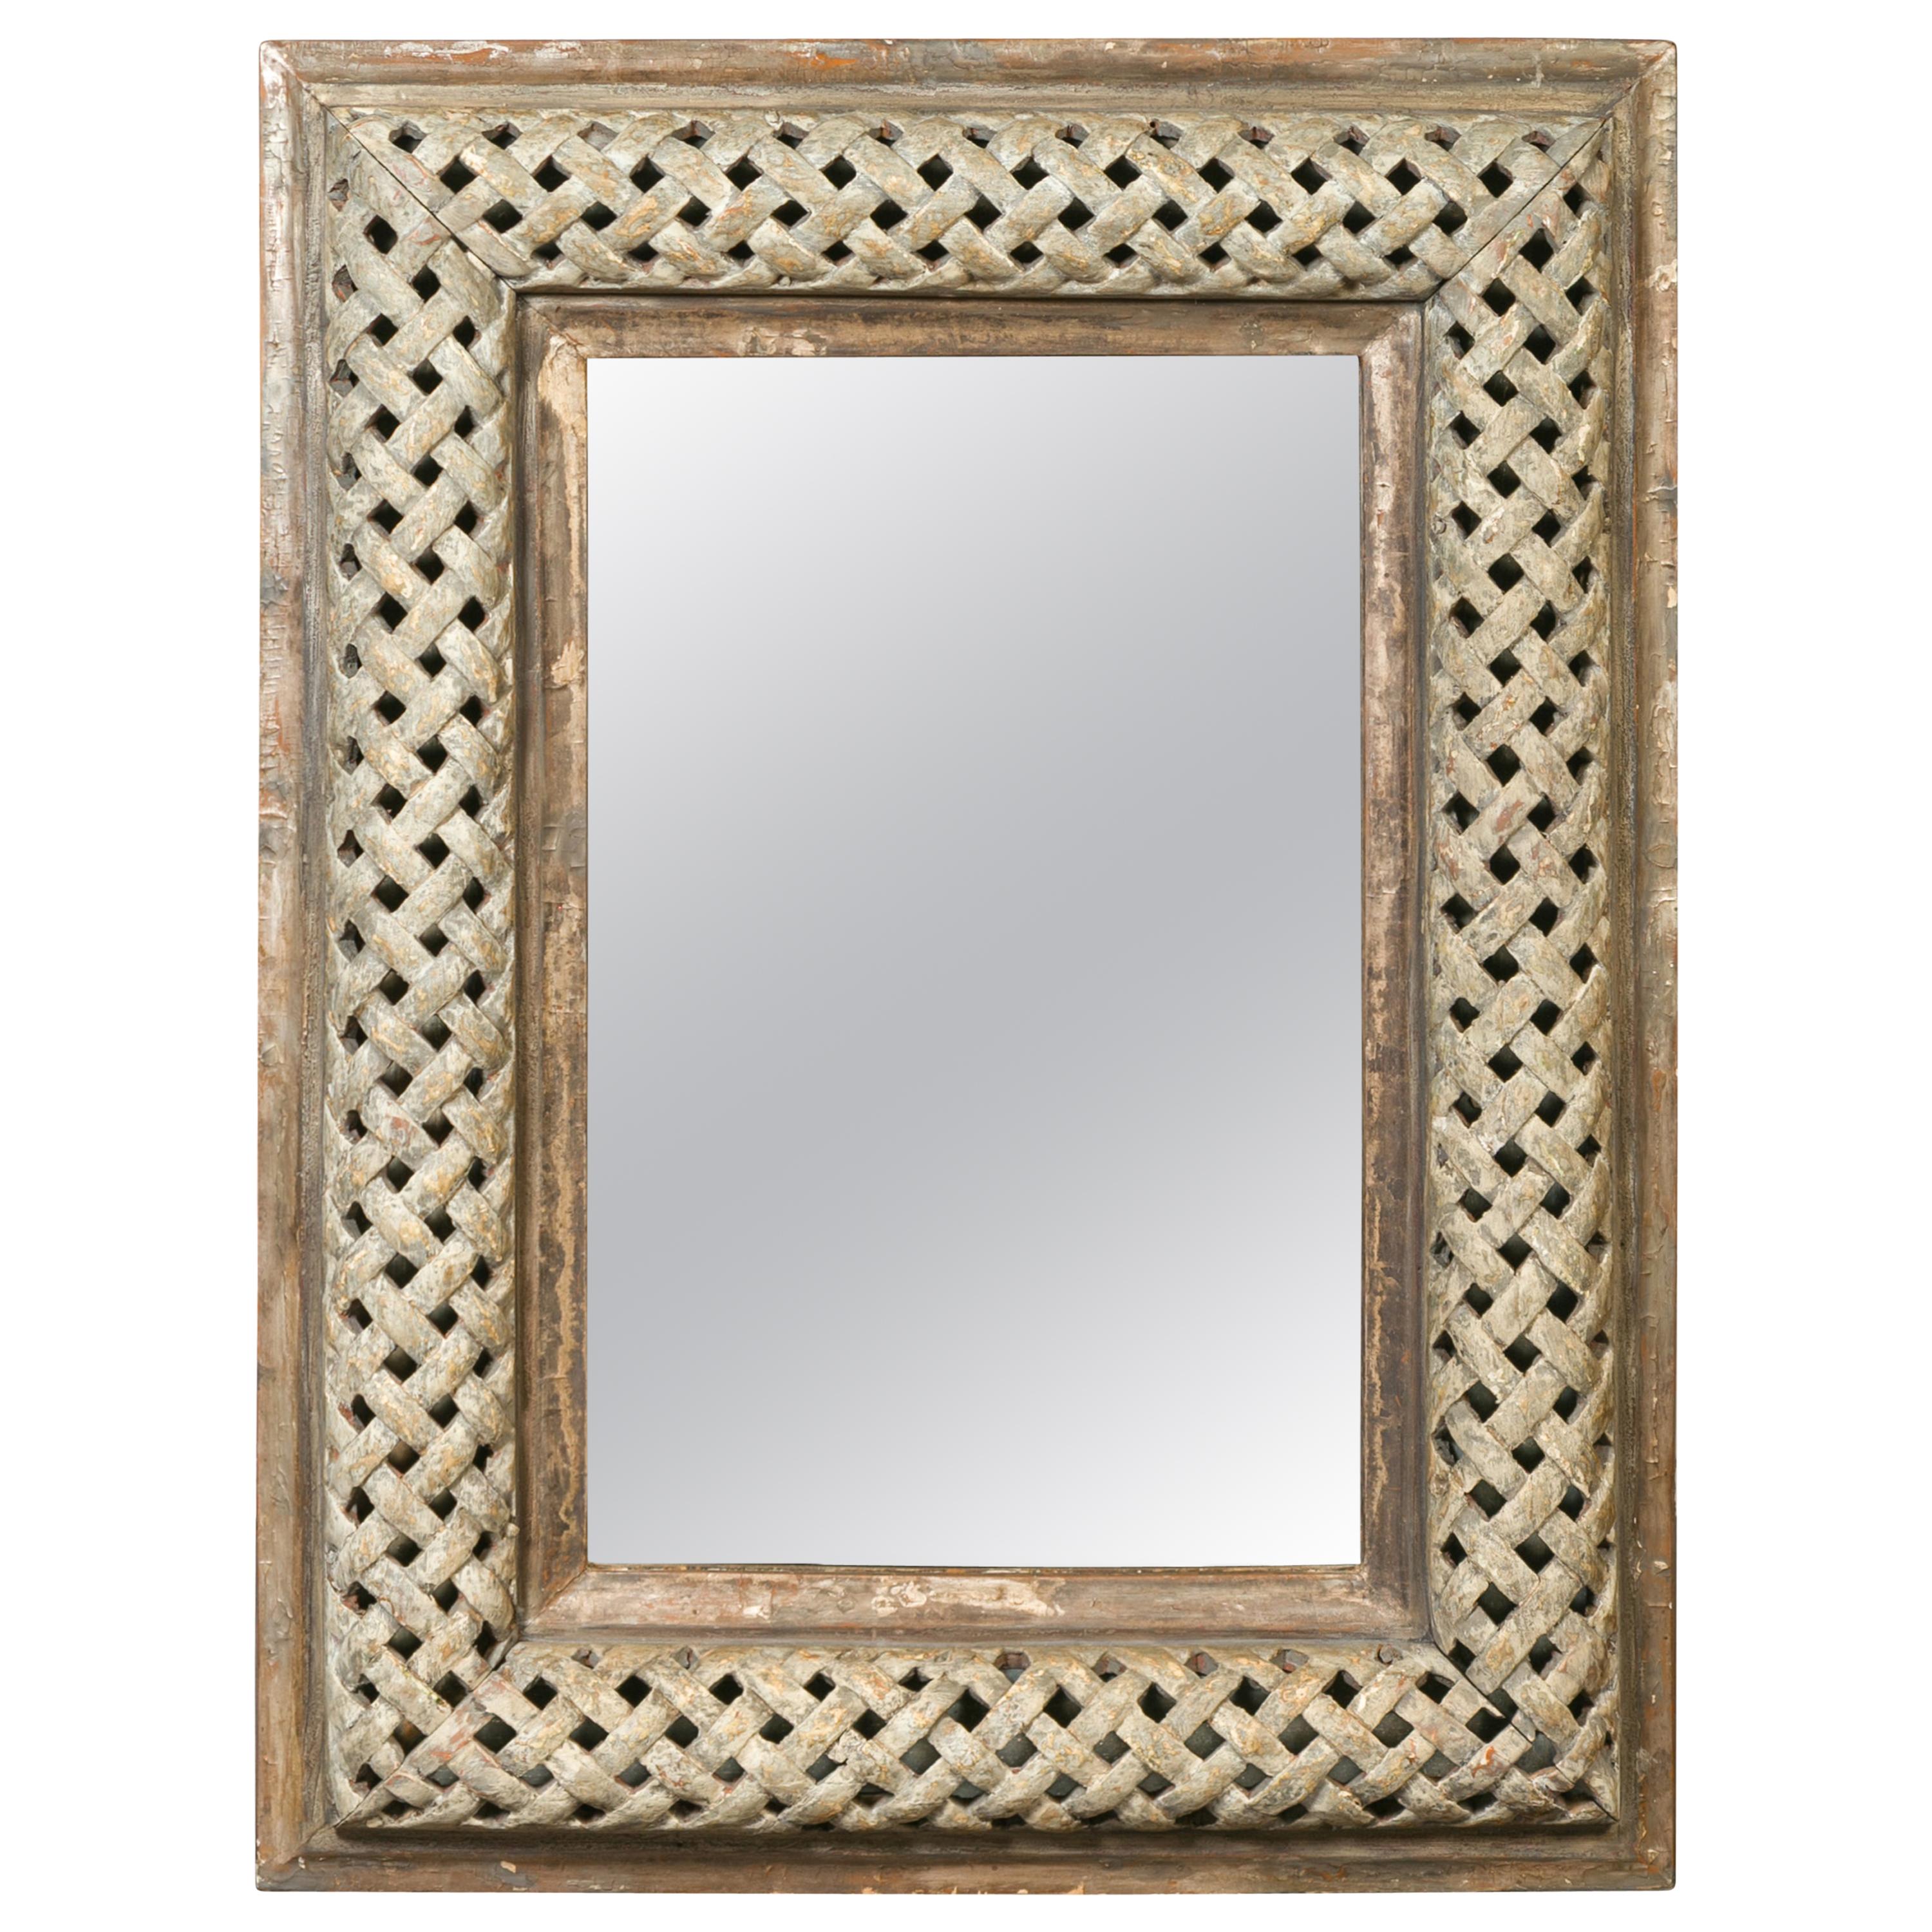 Italian 1870s Painted and Carved Wooden Mirror with Trellis Inspired Motifs